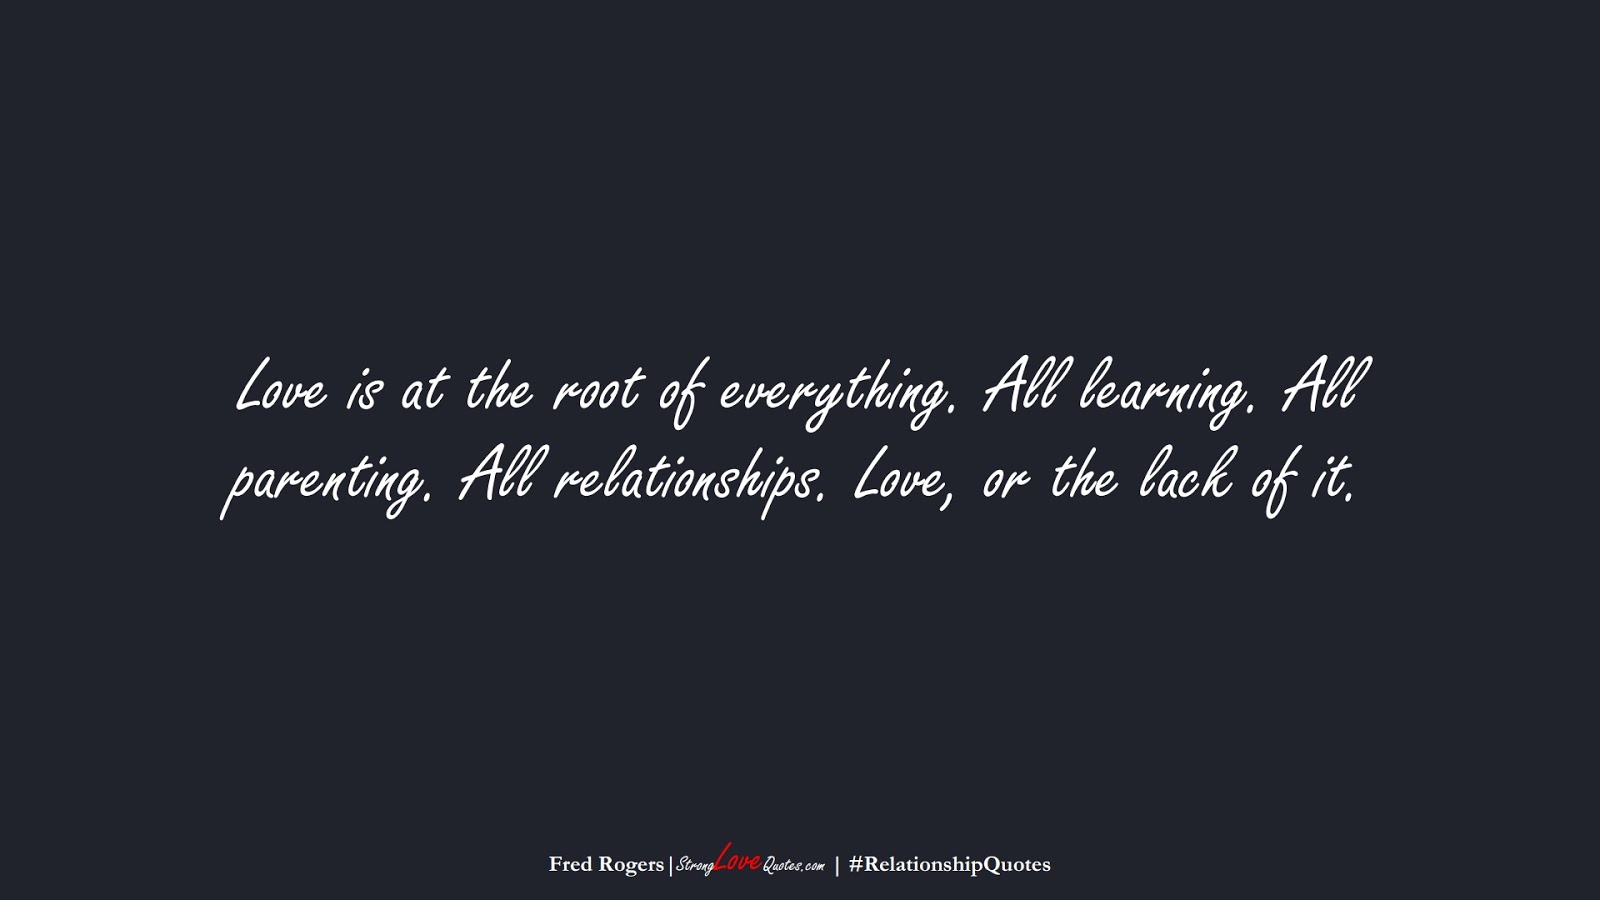 Love is at the root of everything. All learning. All parenting. All relationships. Love, or the lack of it. (Fred Rogers);  #RelationshipQuotes